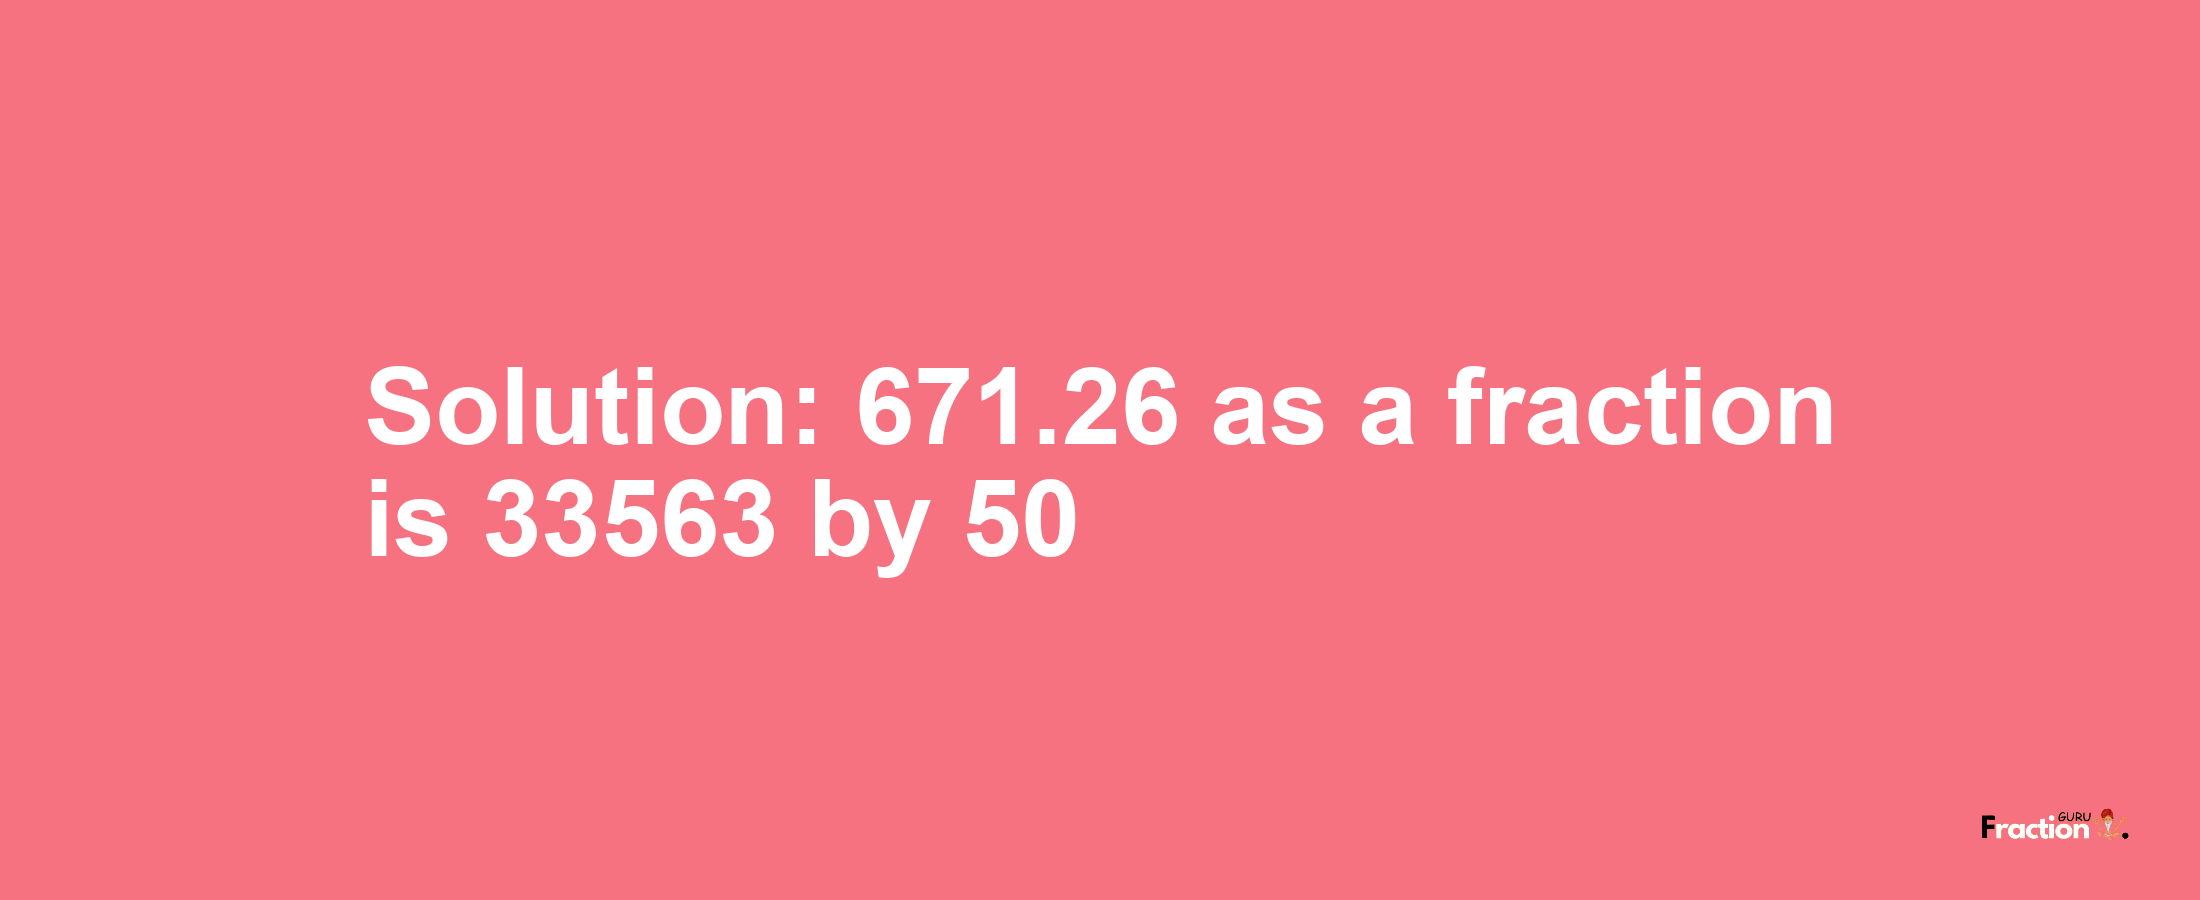 Solution:671.26 as a fraction is 33563/50